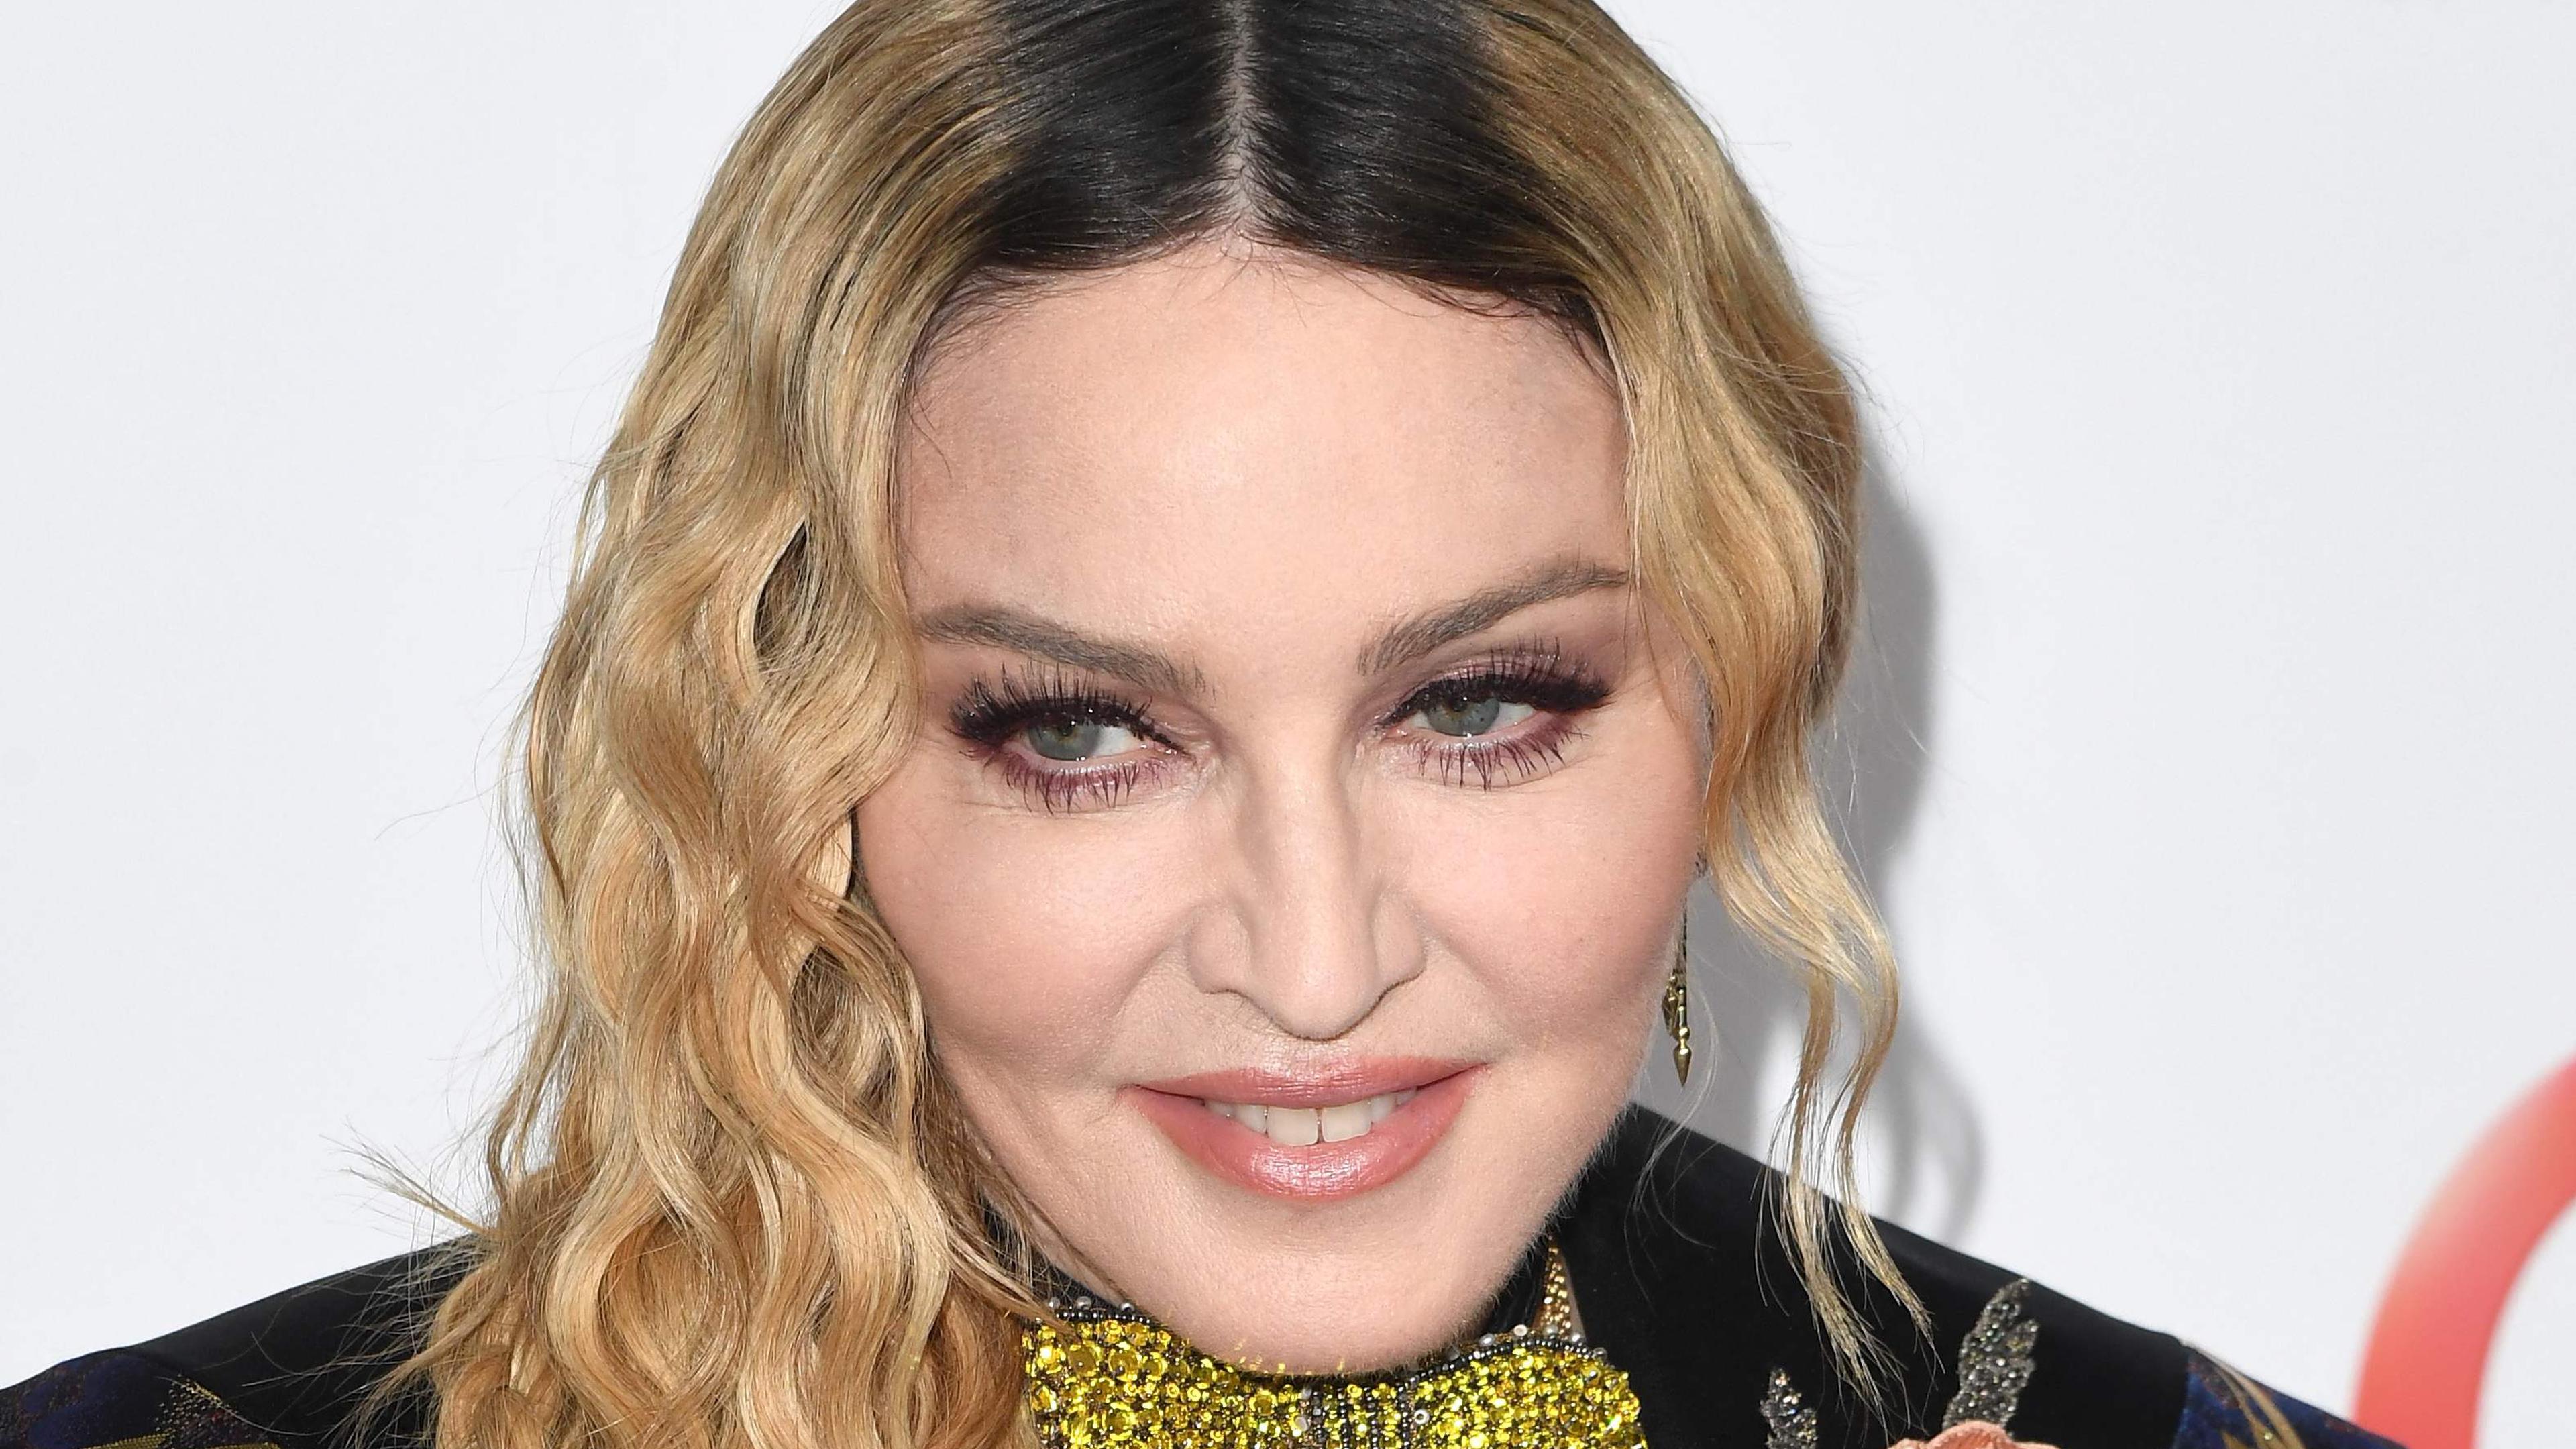 (FILES) Madonna attends the Billboard Women in Music 2016 event on December 9, 2016 in New York City. Madonna is recovering after falling ill with a "serious bacterial infection" that landed her in an intensive care unit for several days, her manager Guy Oseary said in a statement posted to social media on June 28.
"Her health is improving, however she is still under medical care," he said. "A full recovery is expected."
Oseary said the pop icon's "Celebrations" tour, due to start July 15 in Vancouver, was postponed until further notice. (Photo by ANGELA WEISS / AFP)